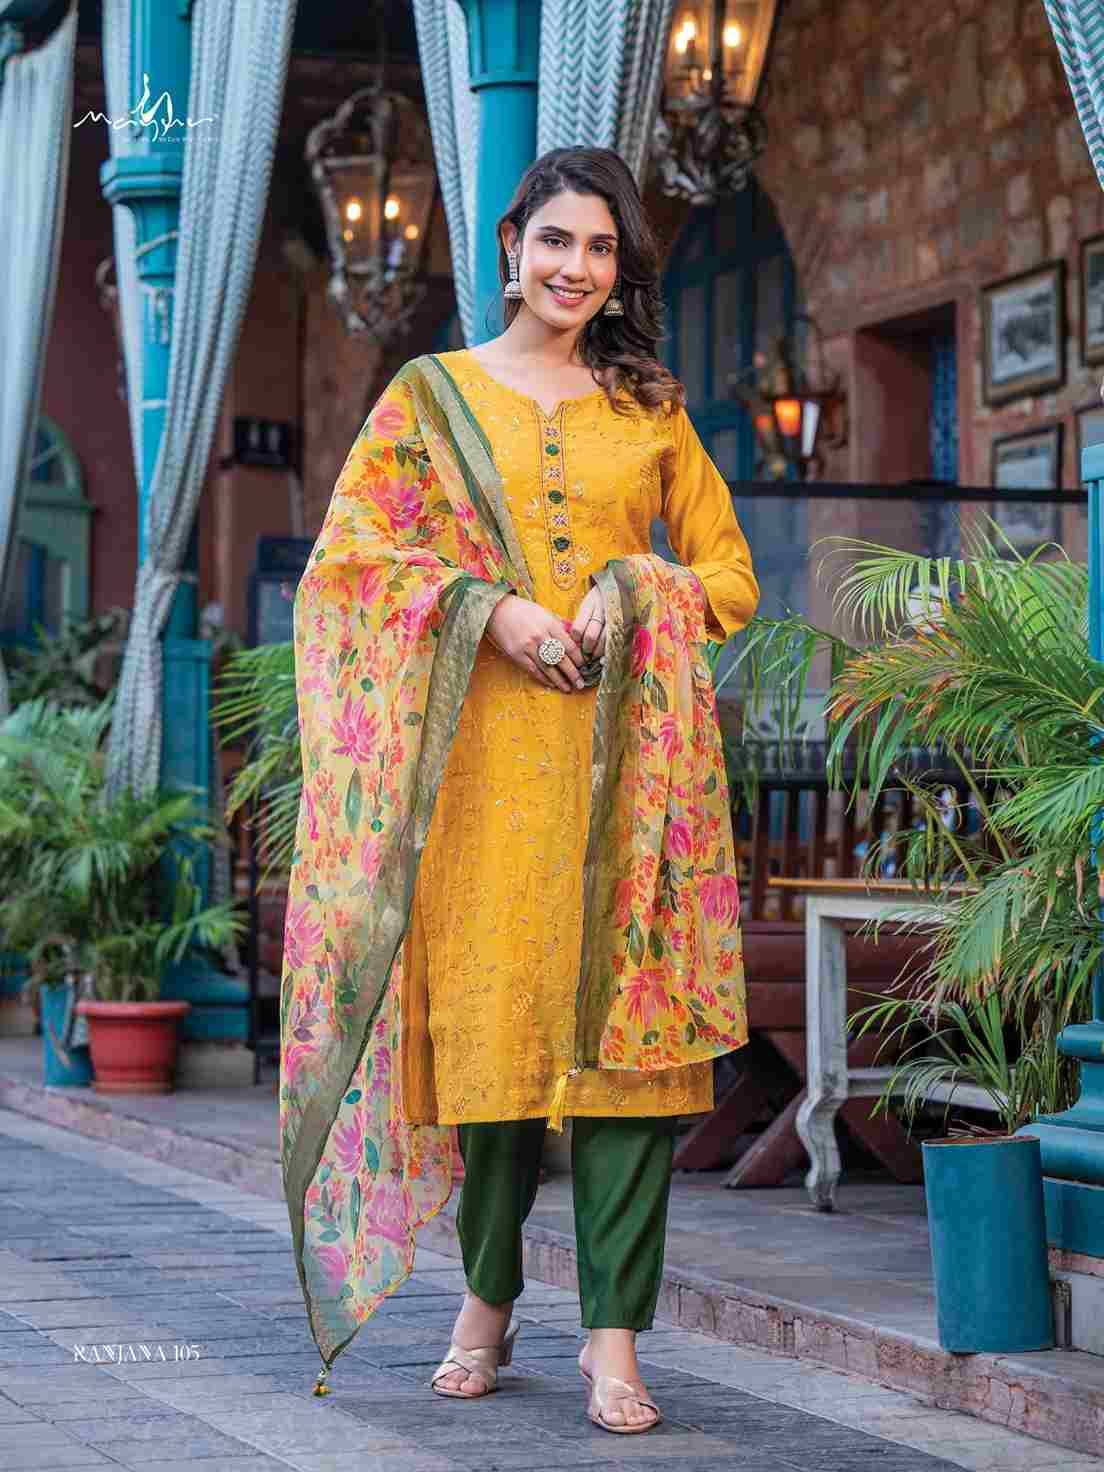 Ranjana By Mayur 101 To 106 Series Beautiful Stylish Festive Suits Fancy Colorful Casual Wear & Ethnic Wear & Ready To Wear Heavy Silk Dresses At Wholesale Price